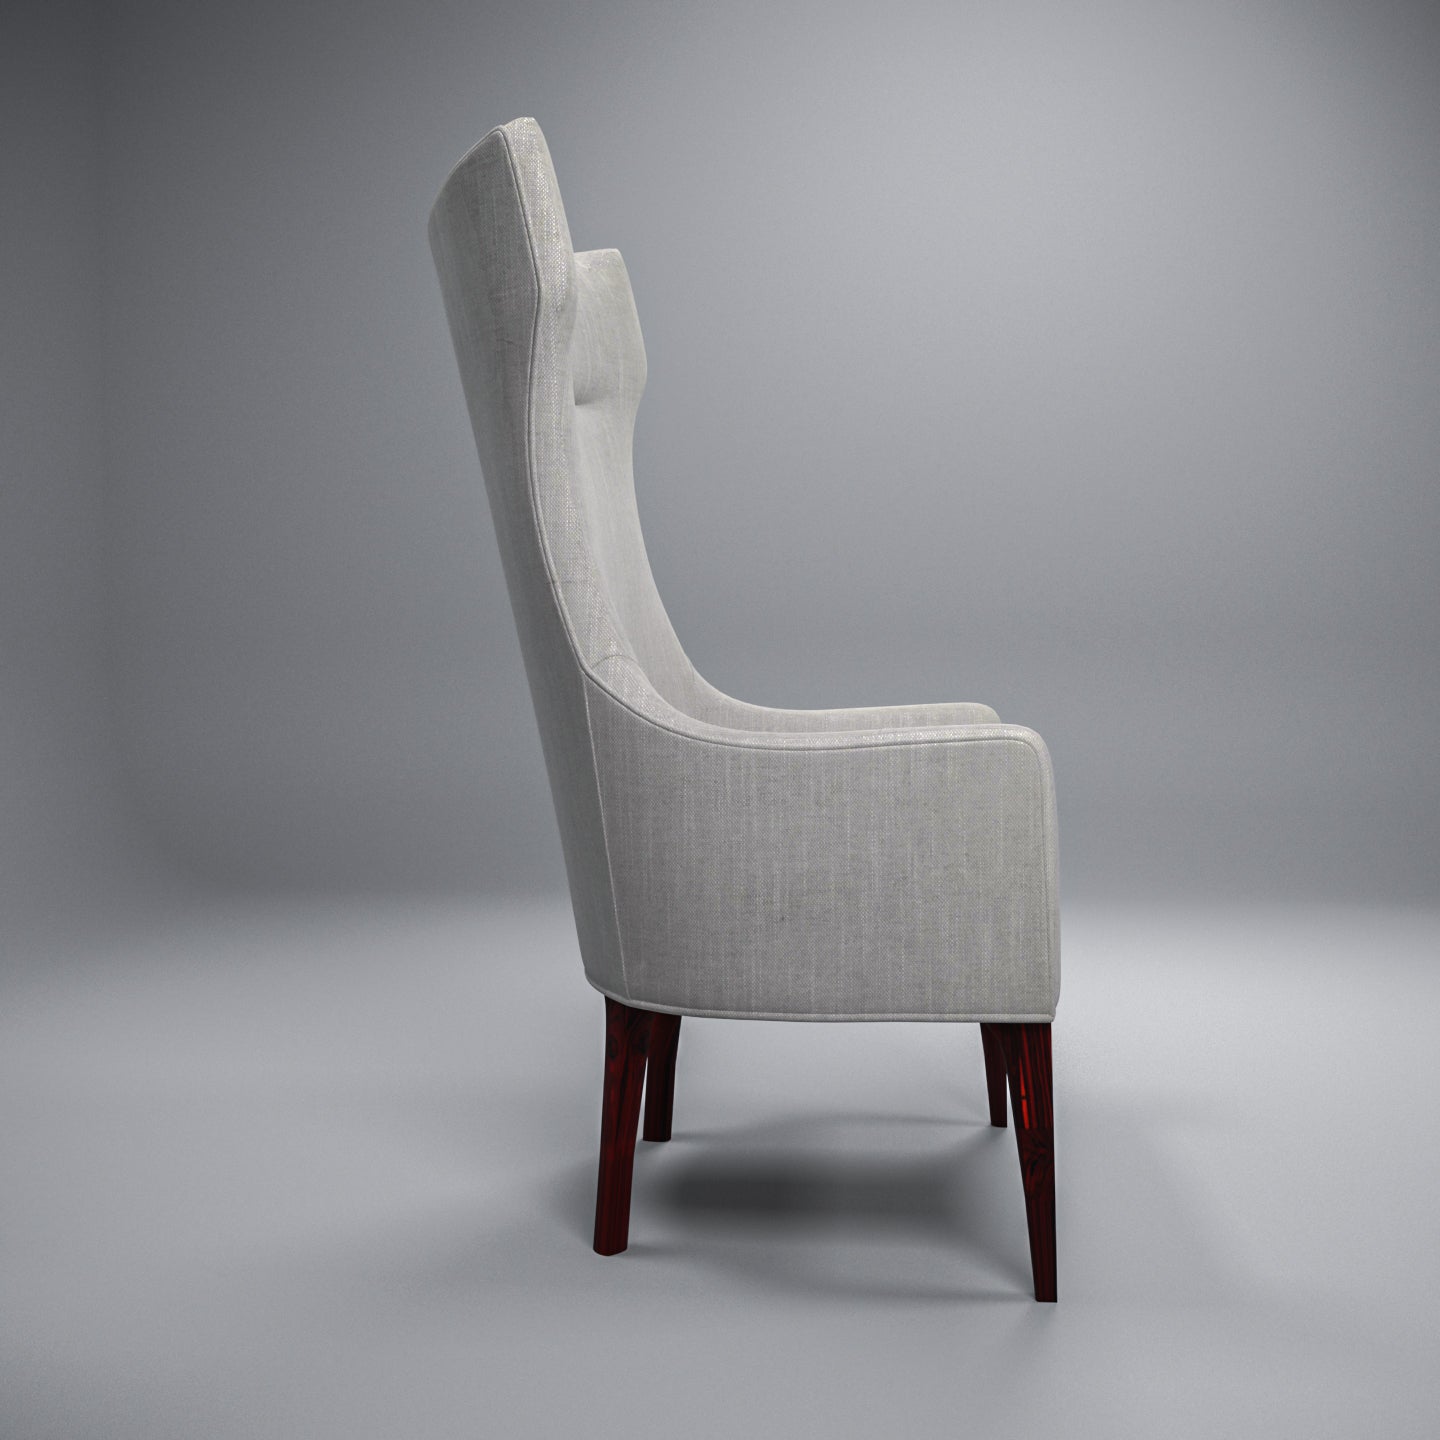 Signature White Ordinary Wooden Arm Chair Arm Chair